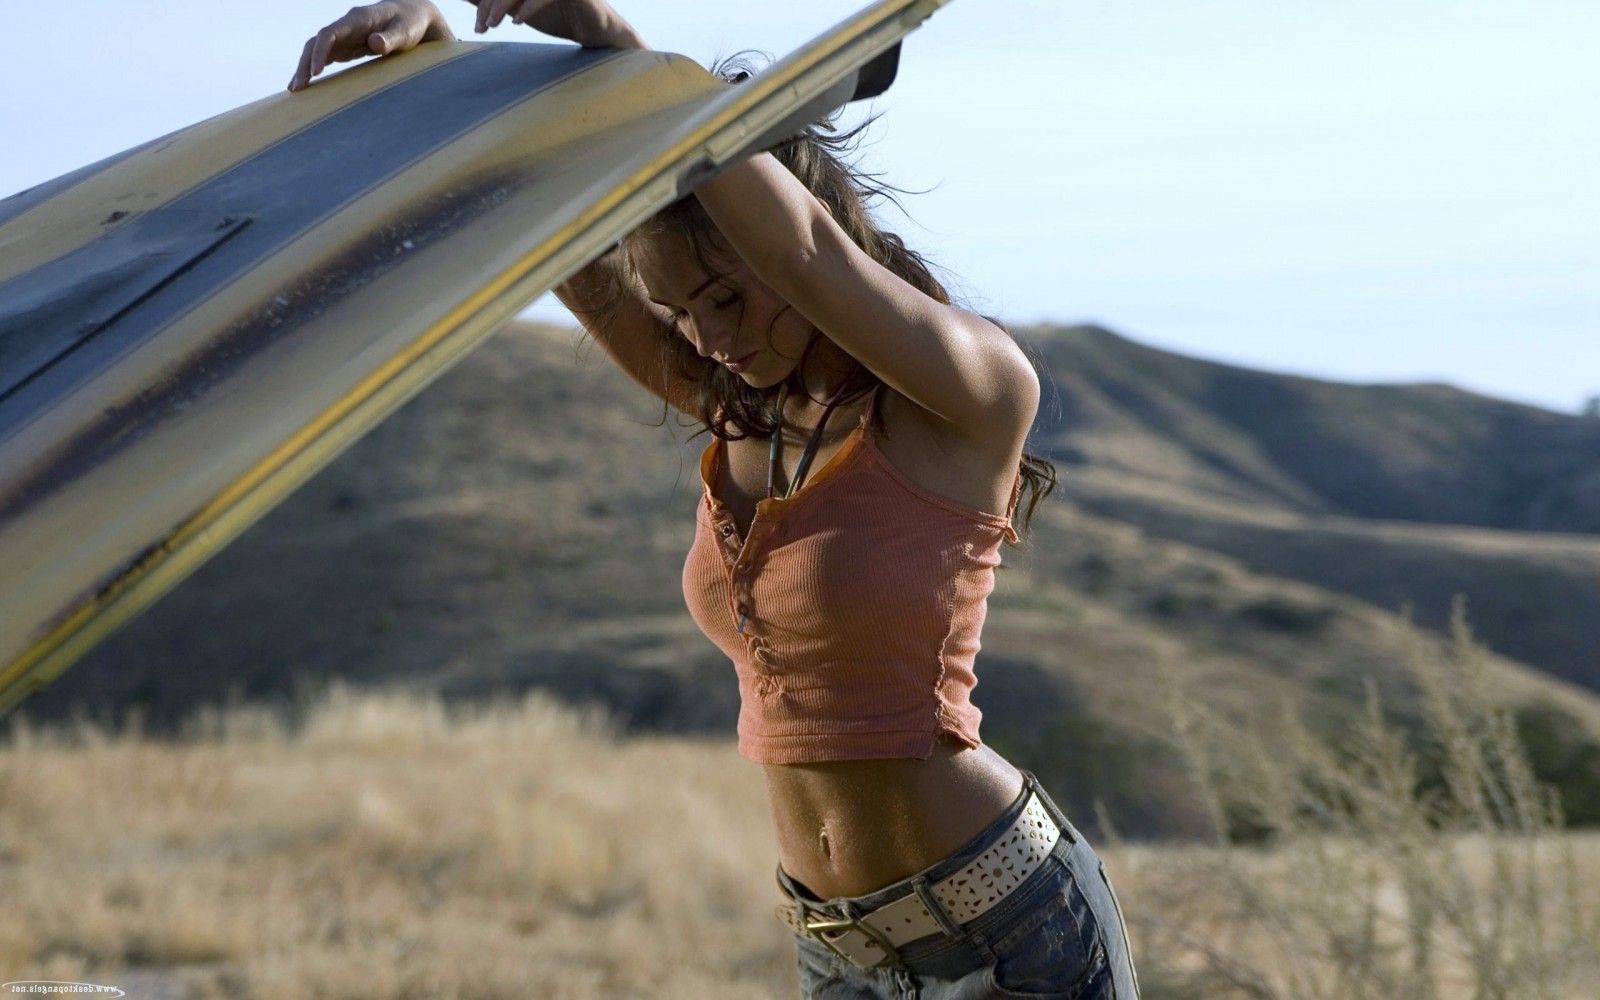 Wallpaper, vehicle, aircraft, movies, actress, Transformers, Megan Fox, 2560x1600 px, atmosphere of earth 2560x1600